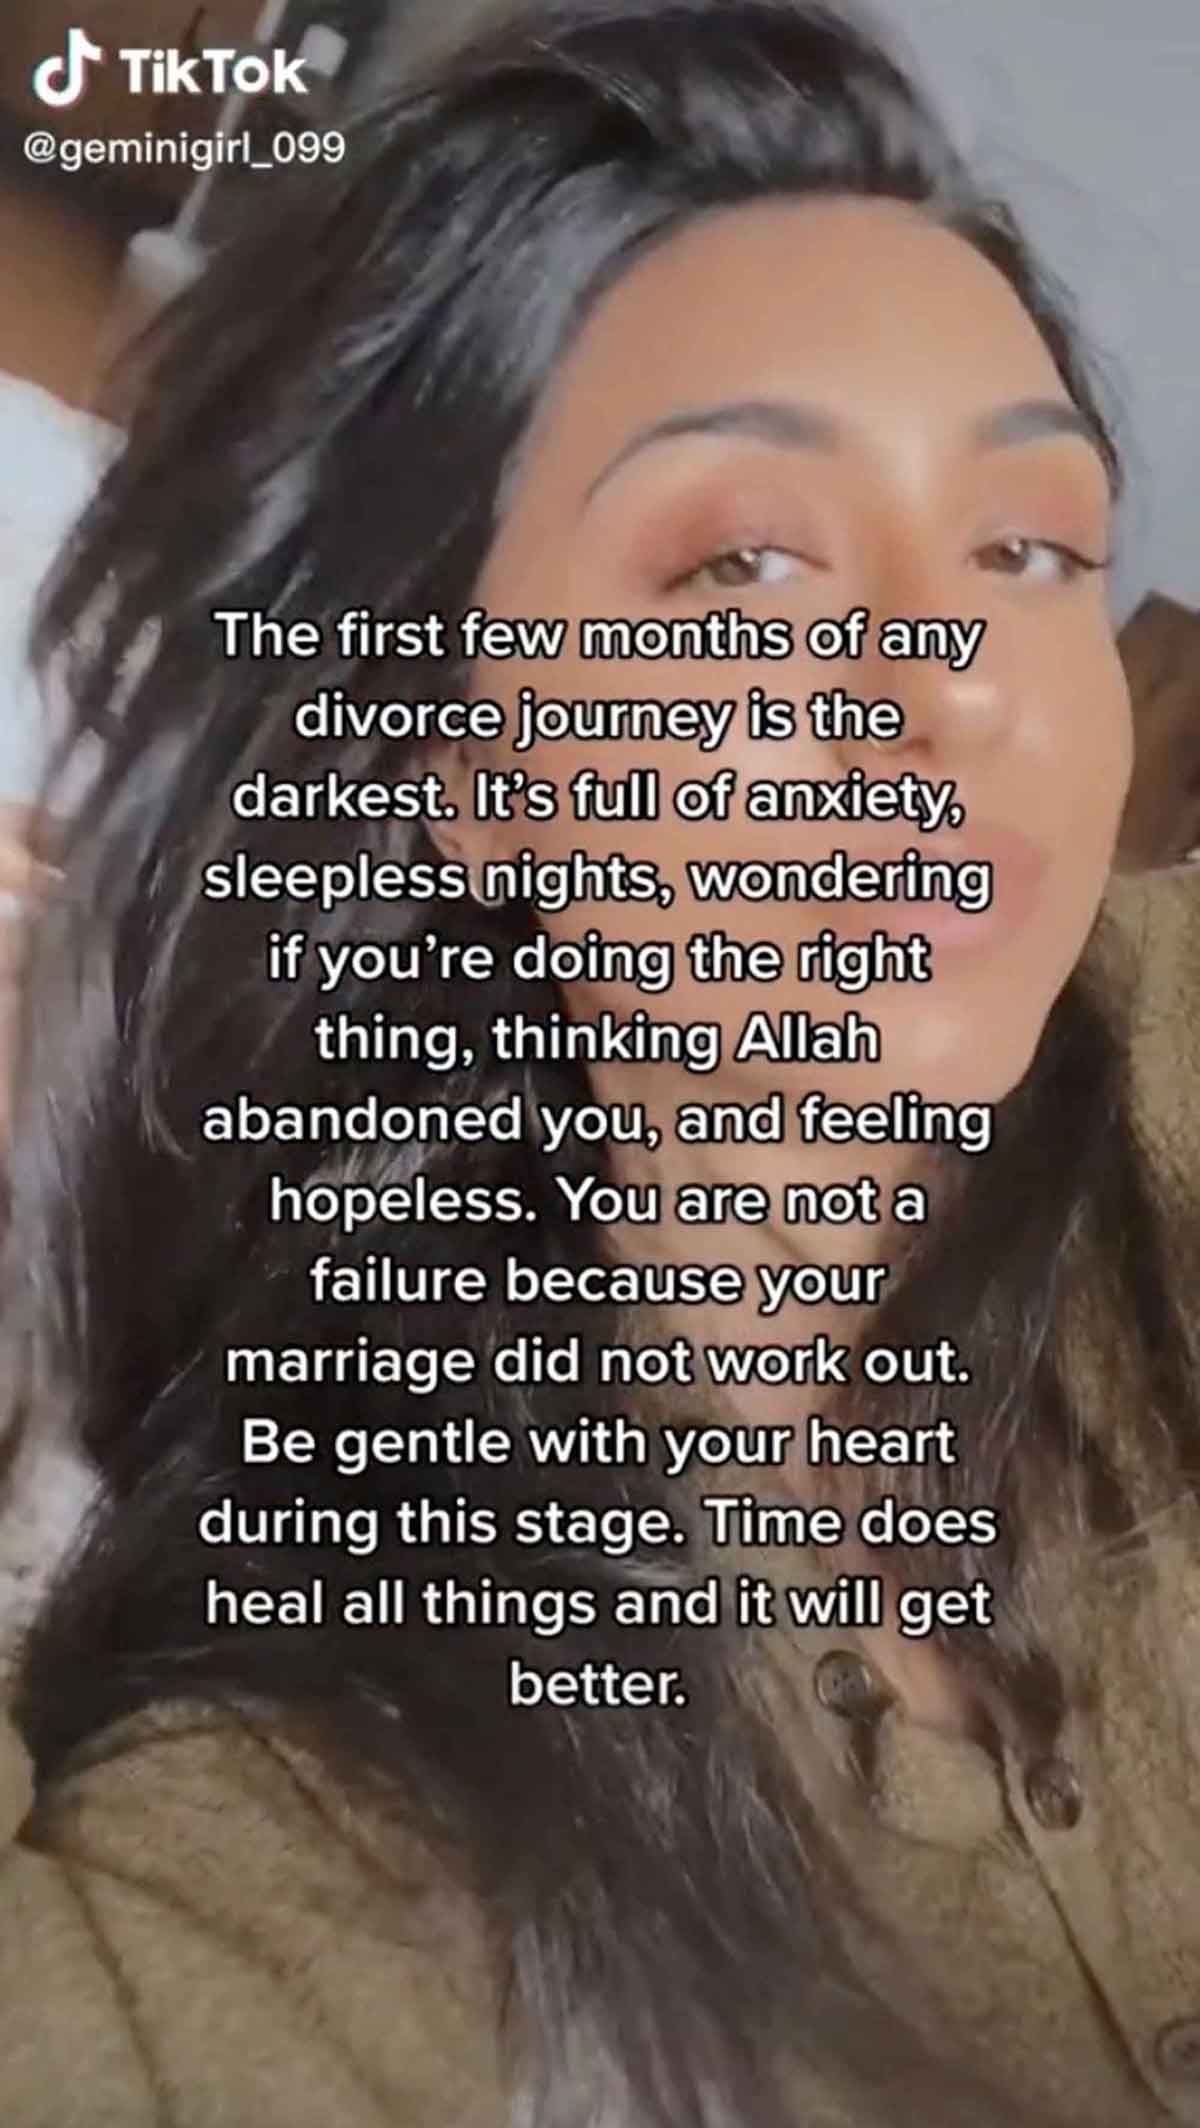 Sania Khan posted about her failed marriage and divorce on TikTok. Image courtesy: TikTok